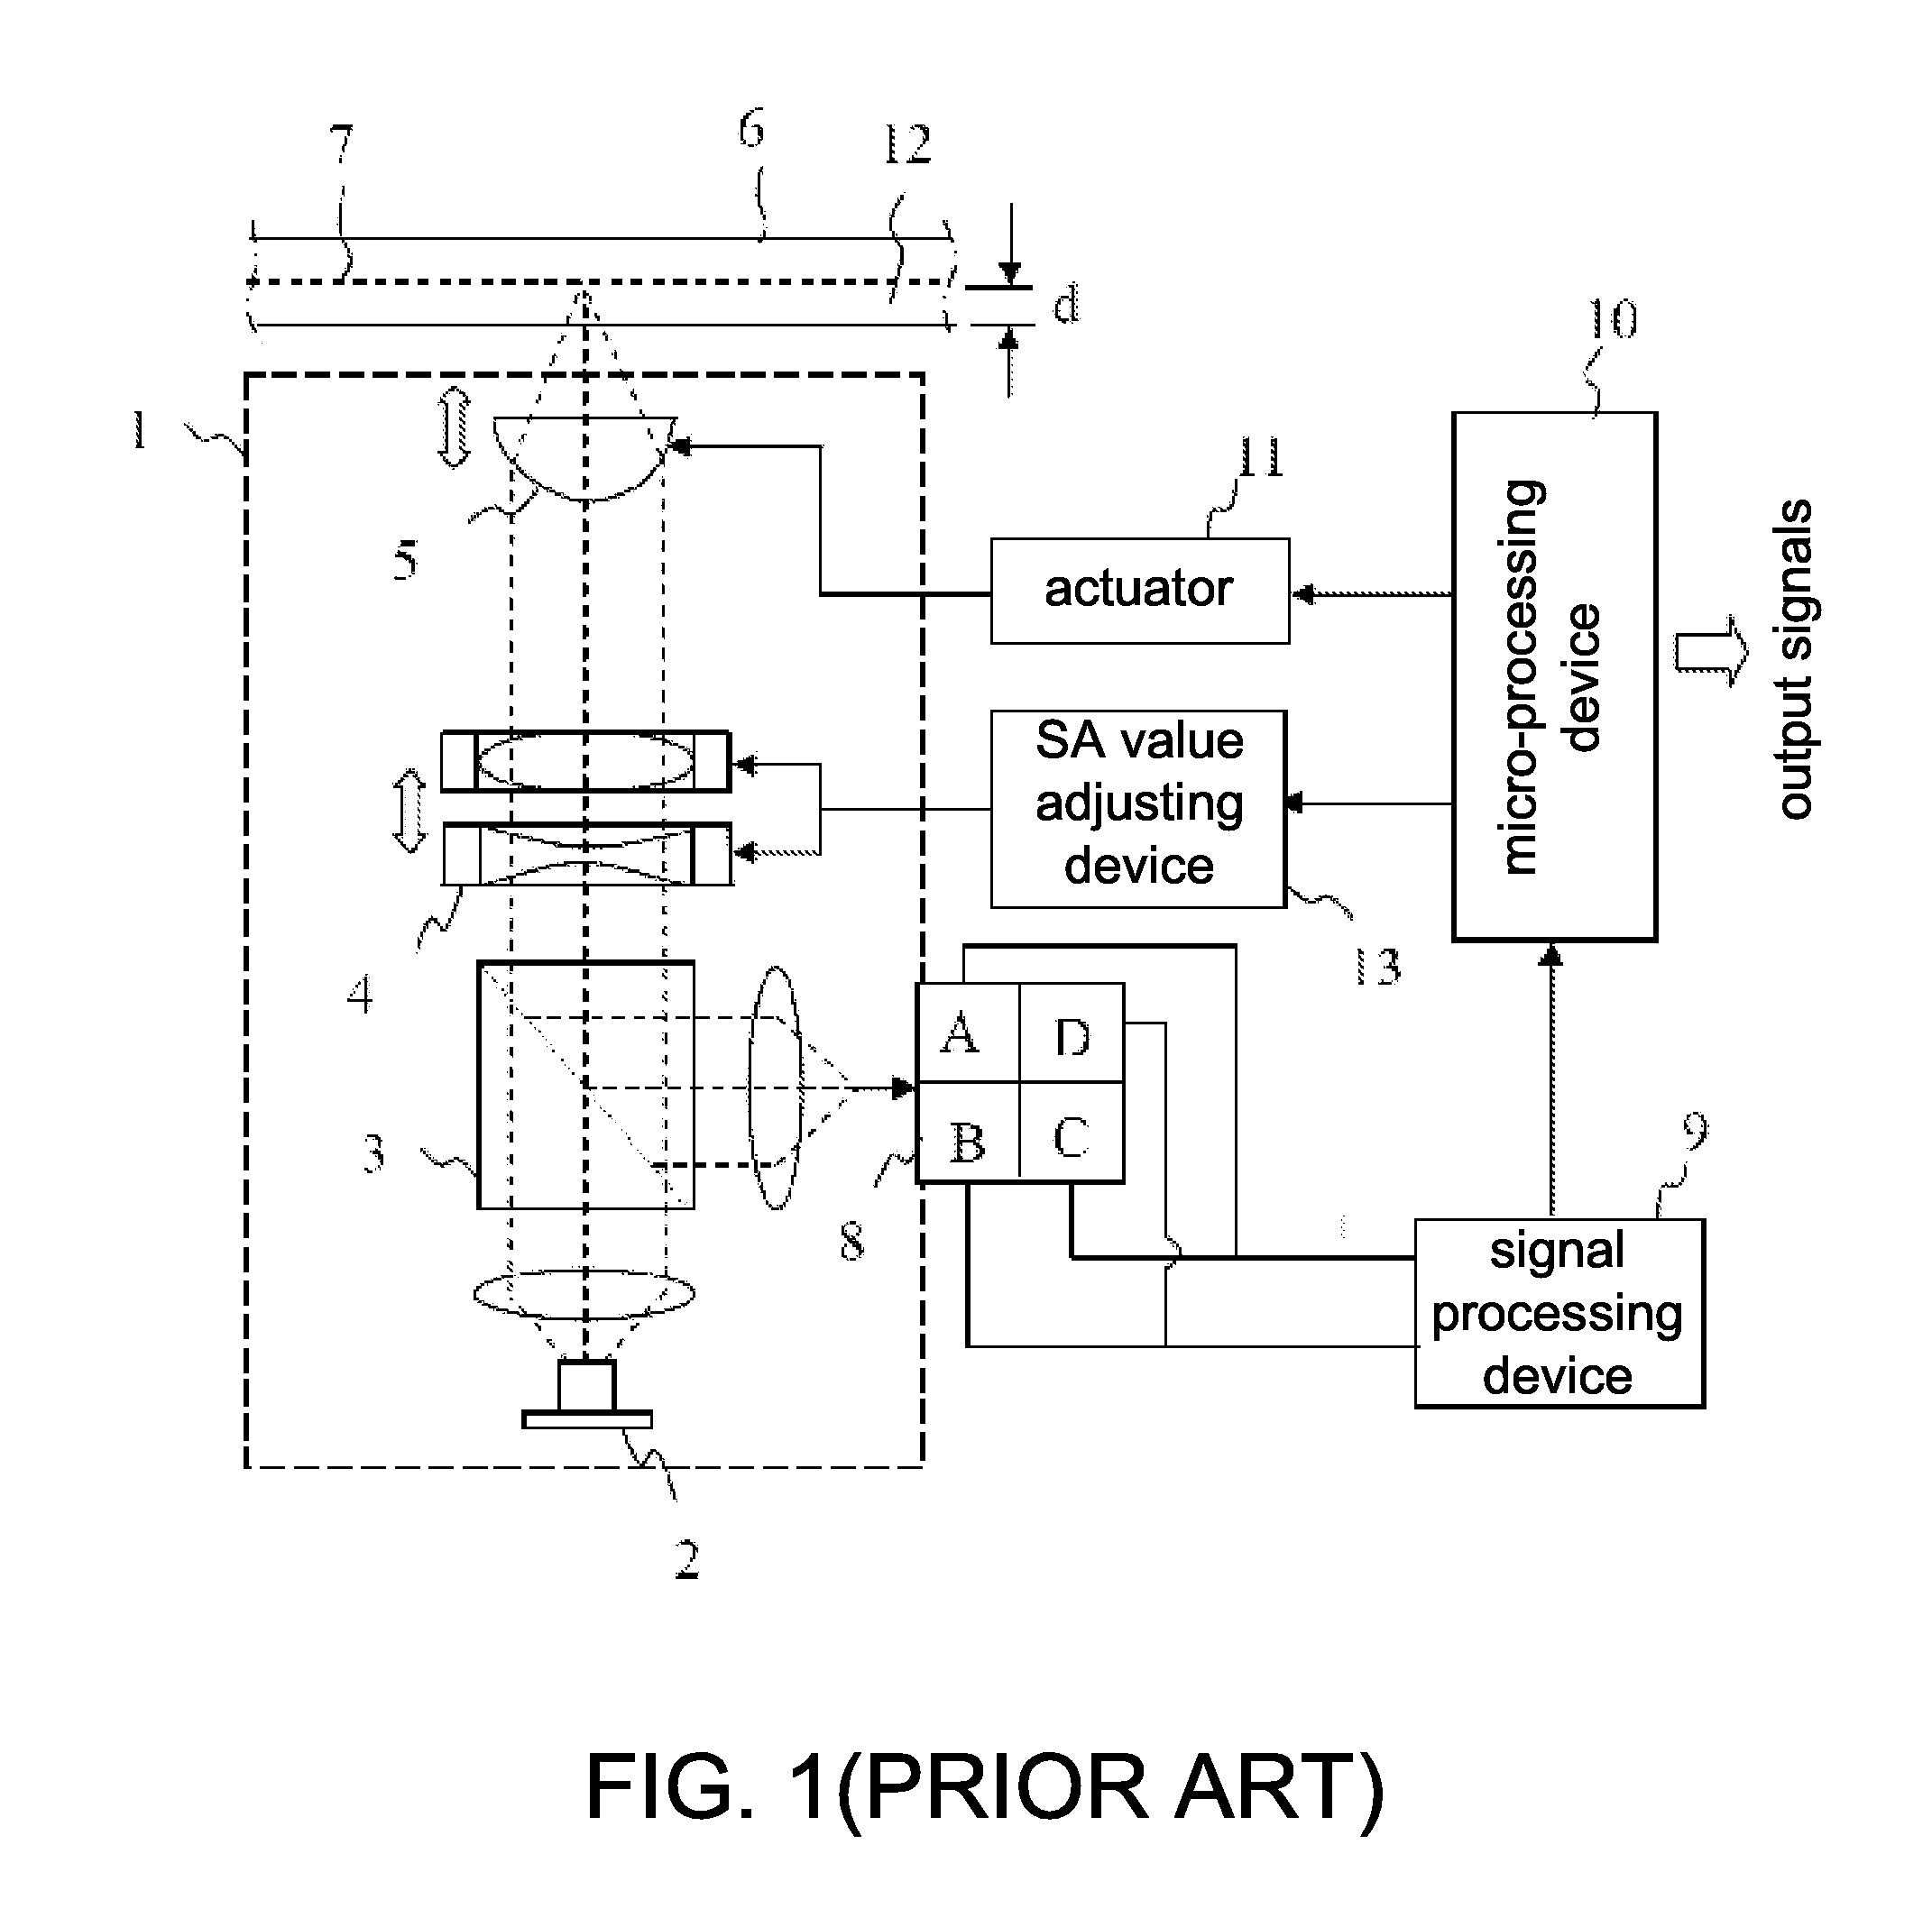 Method for identifing a layer number of an optical disc